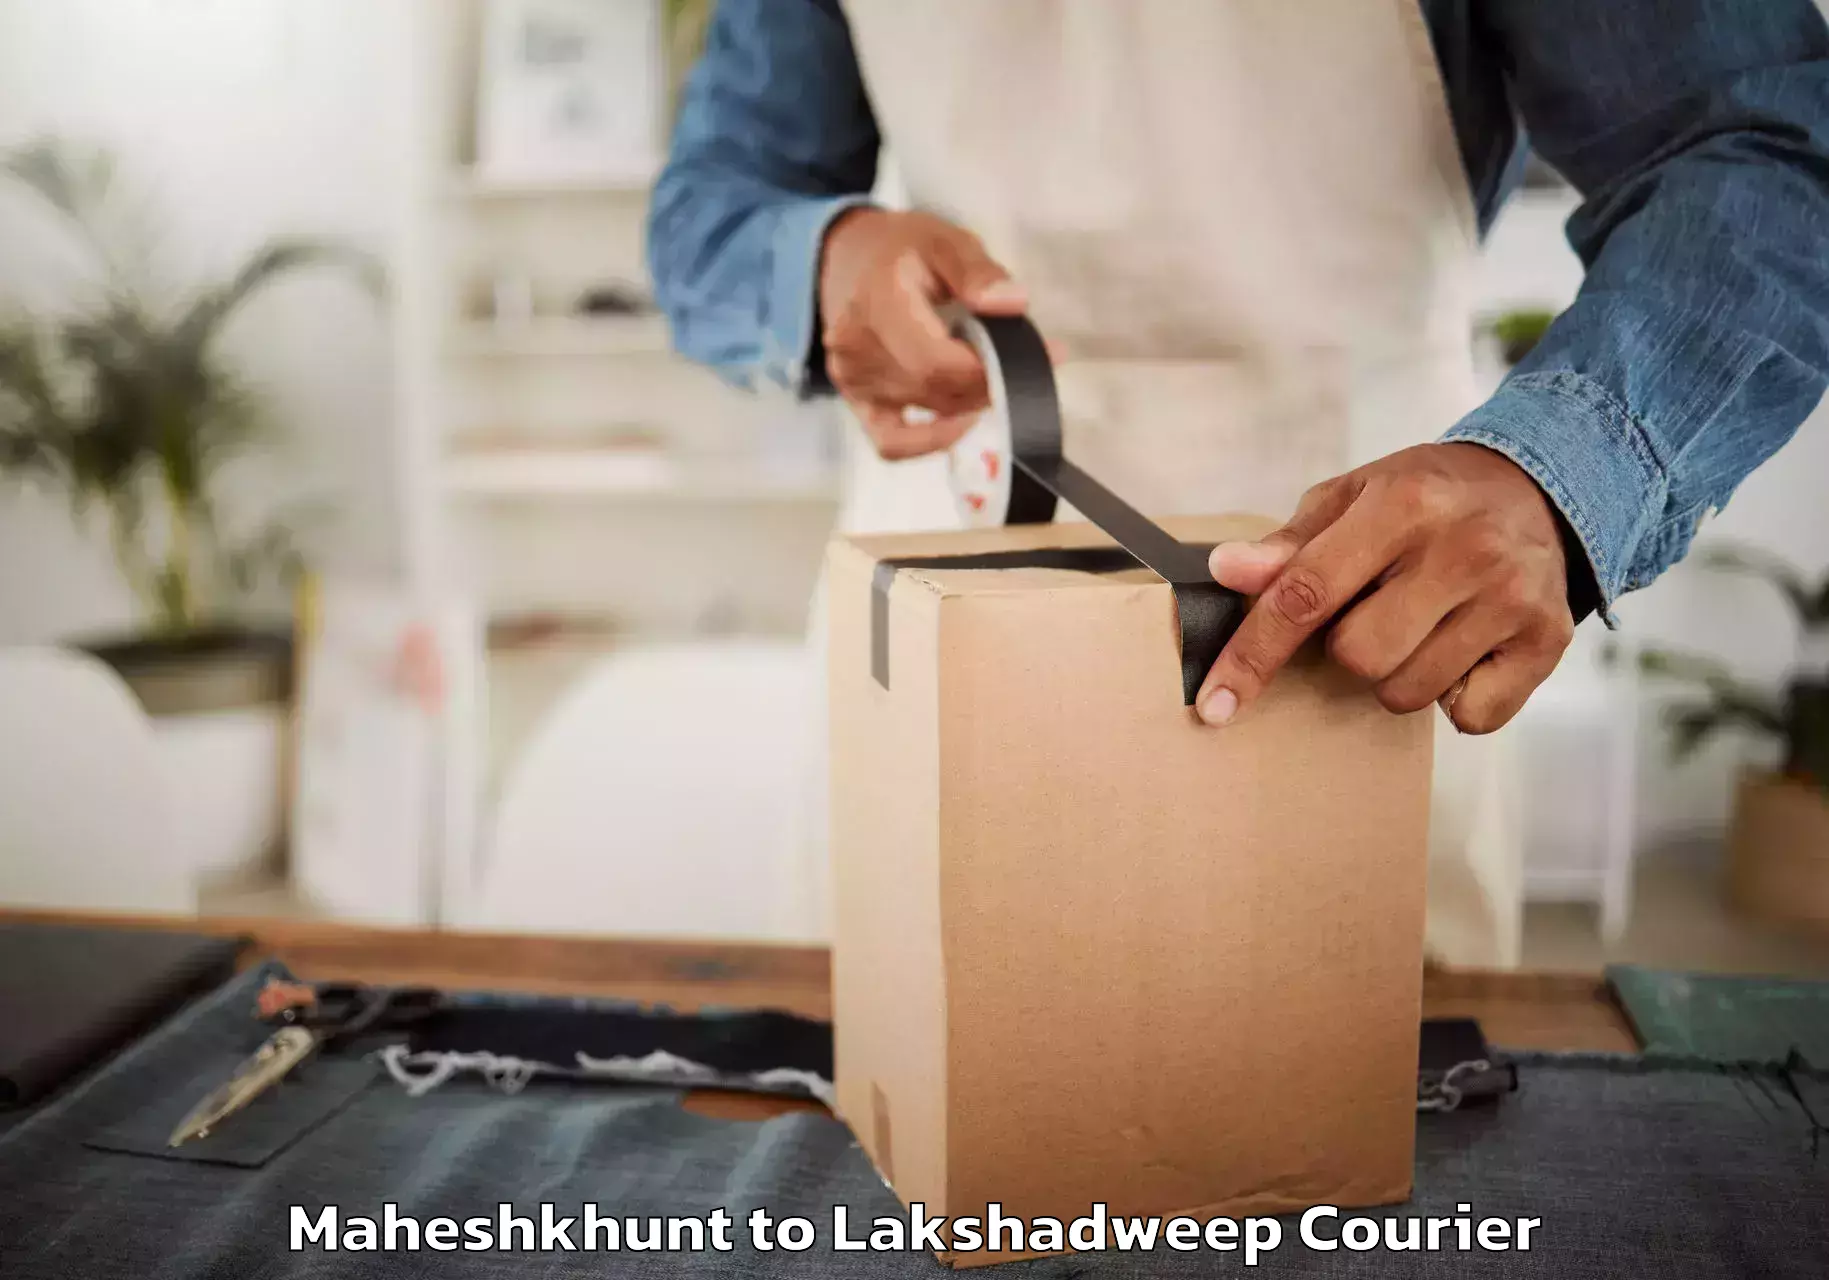 Furniture moving experts in Maheshkhunt to Lakshadweep